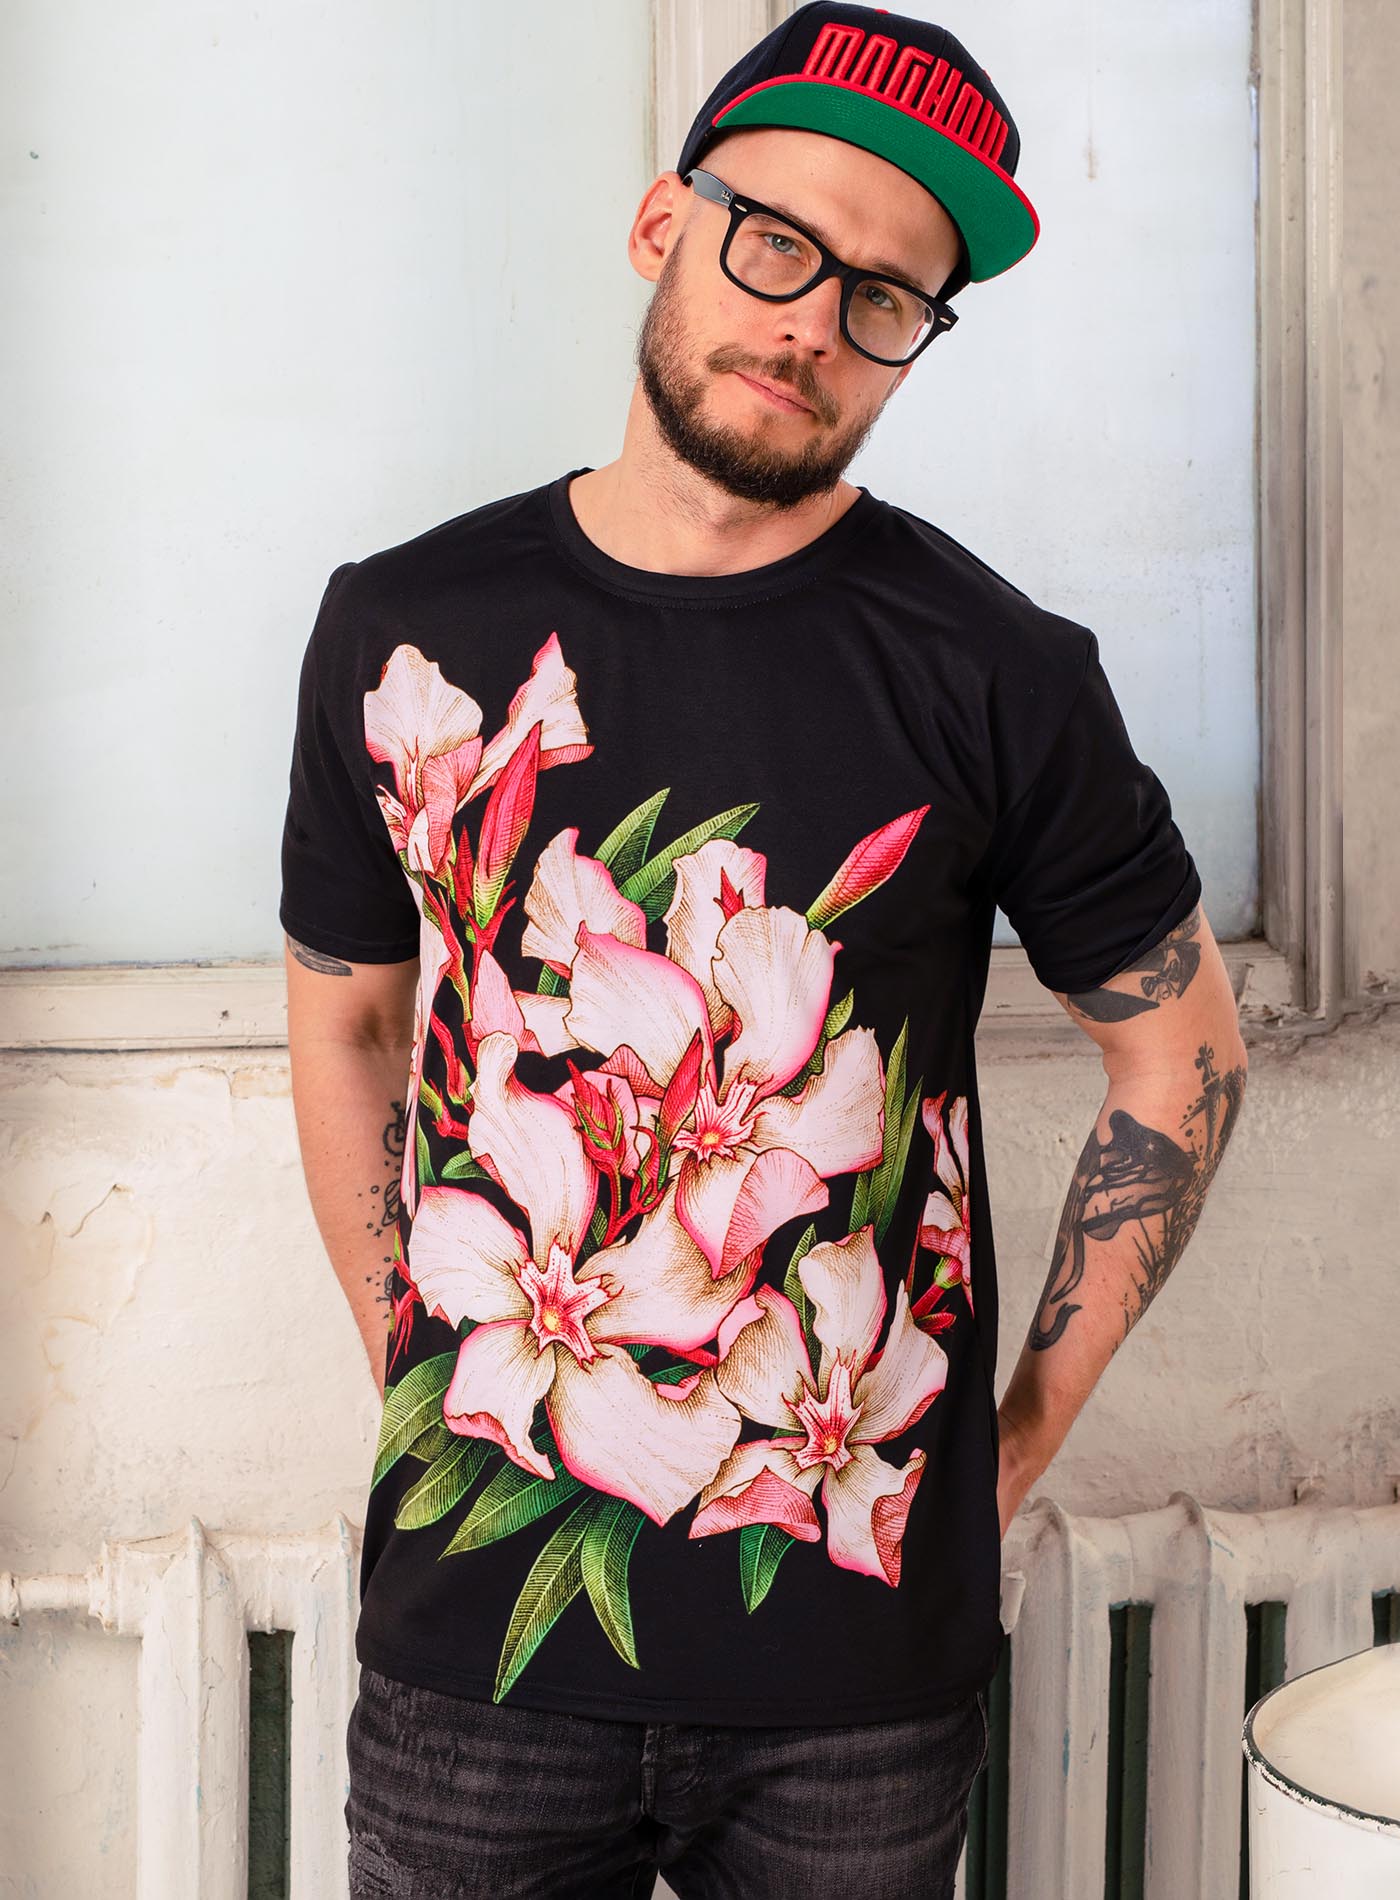 Man modeling an All over dye sublimation t-shirt featuring the poisonous flower Oleander. Illustrated by G.M. Meave.